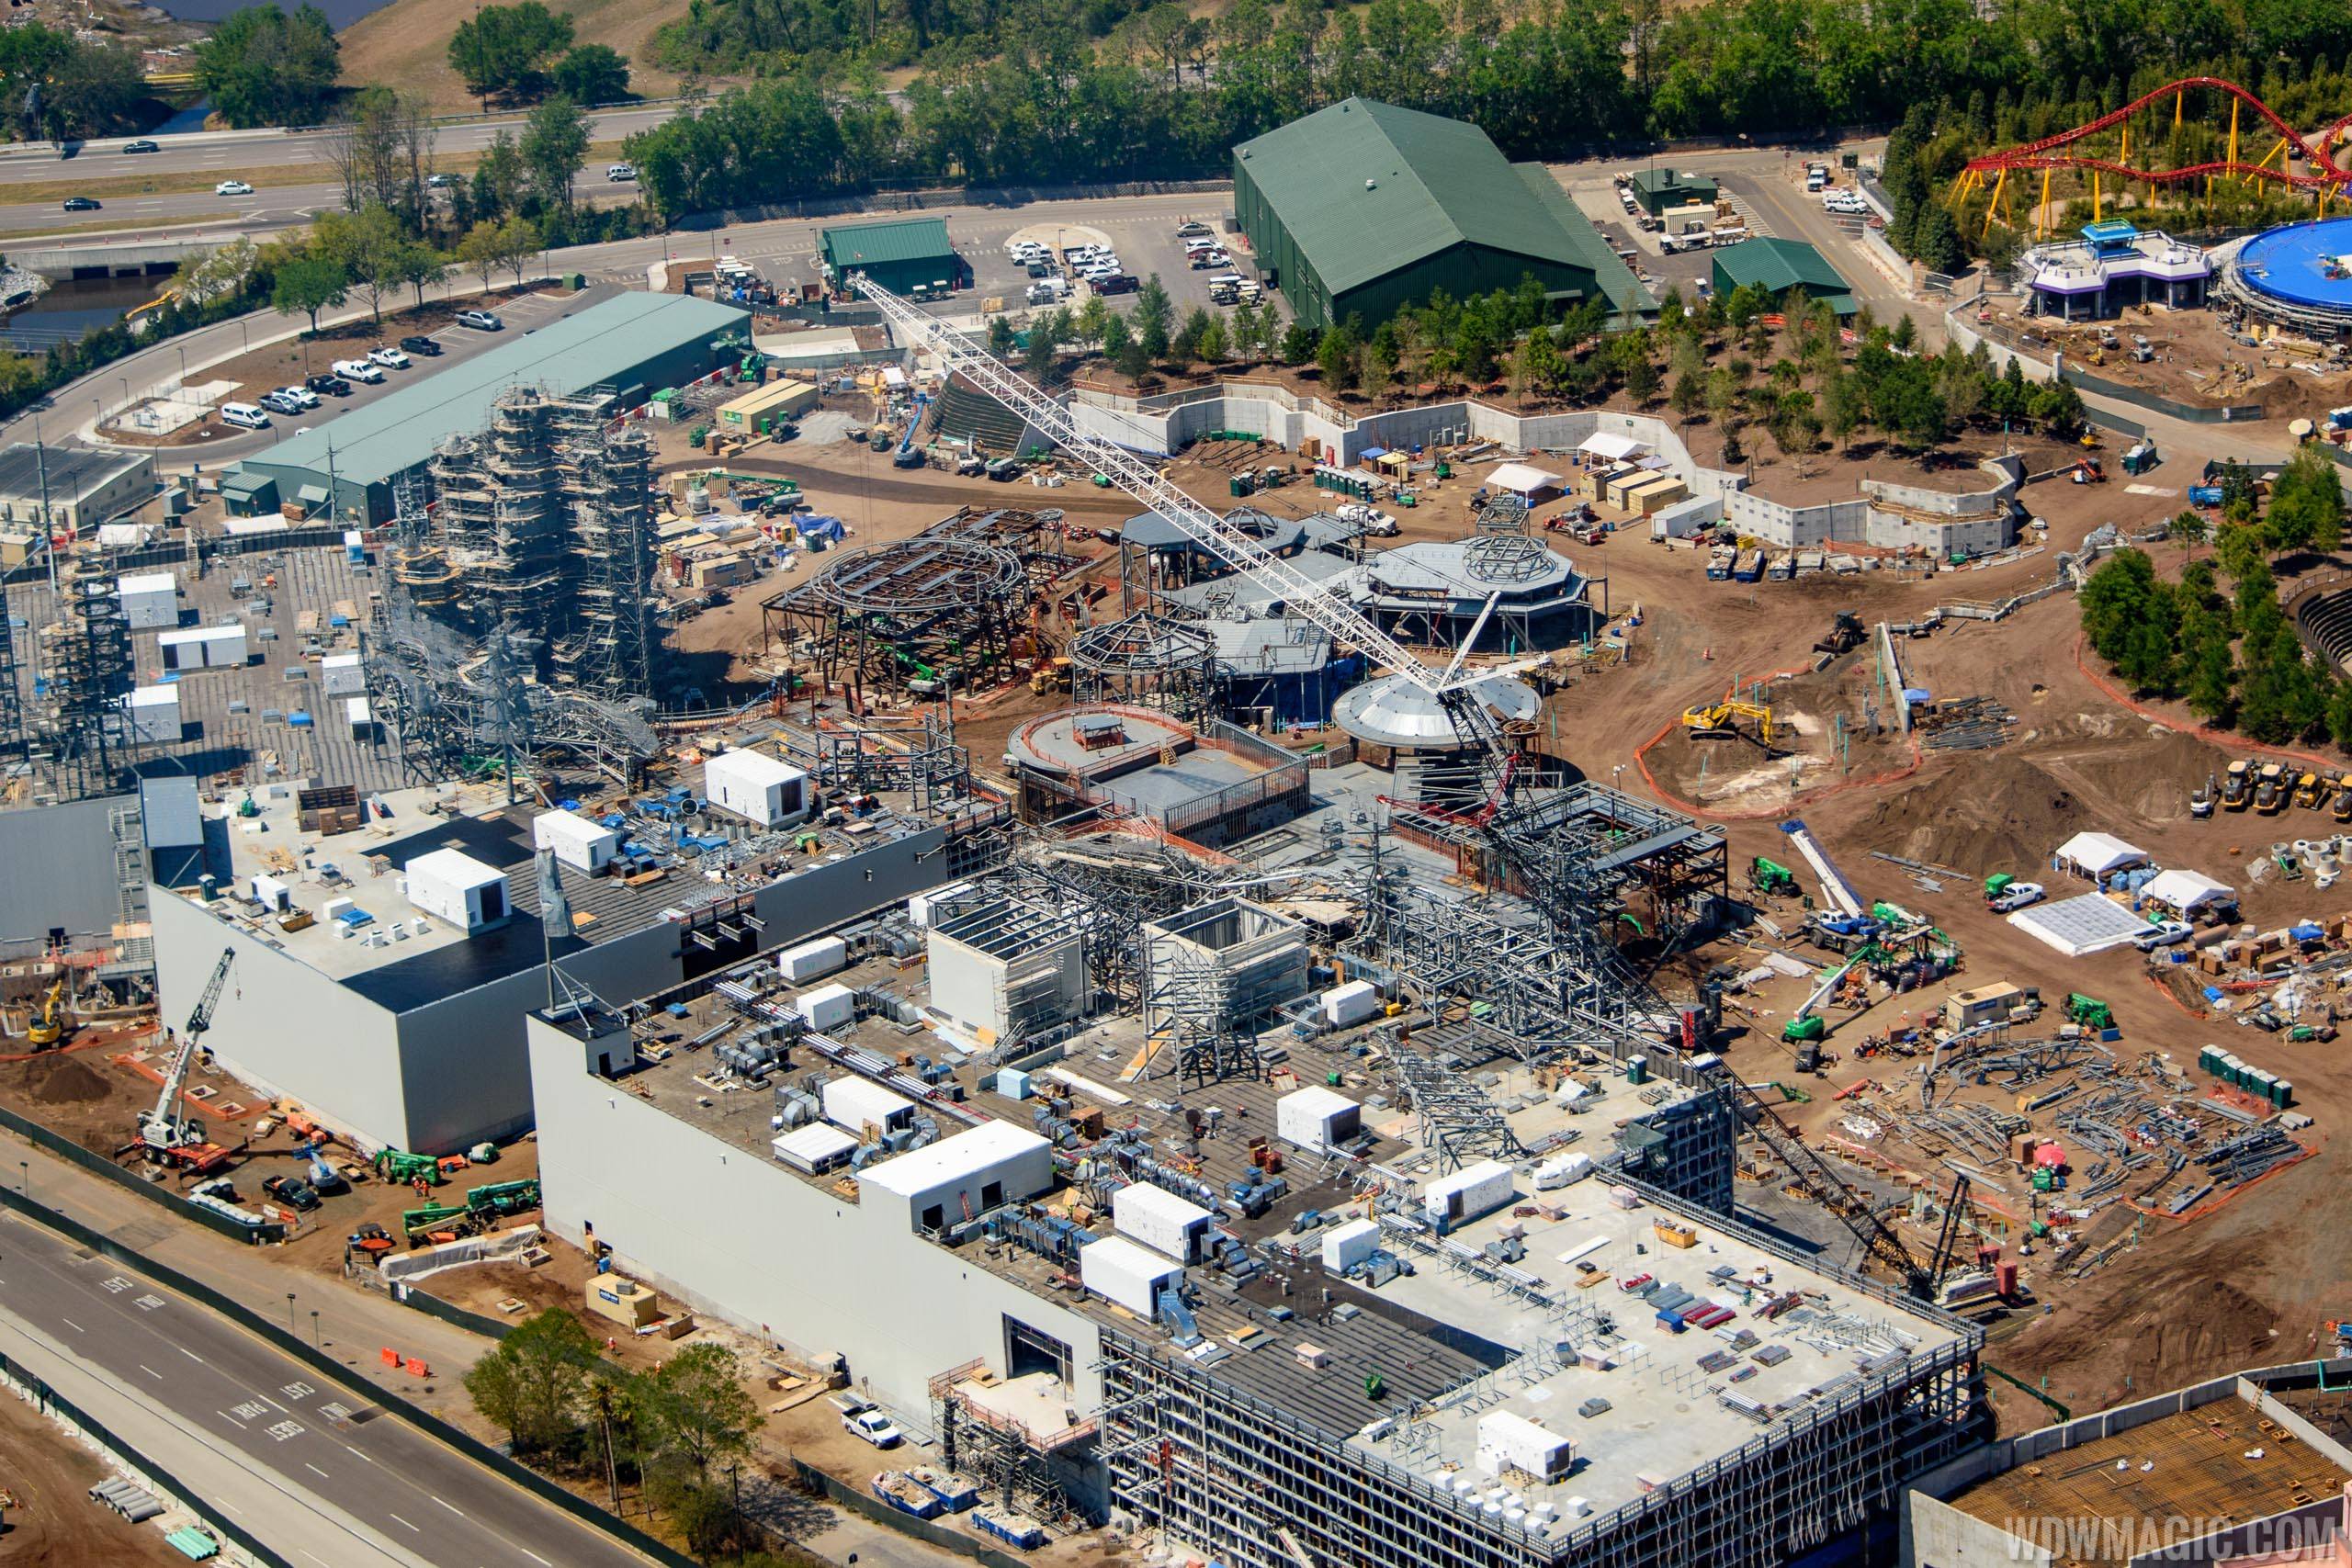 PHOTOS - Aerial pictures of Star Wars Galaxy's Edge construction at Disney's Hollywood Studios